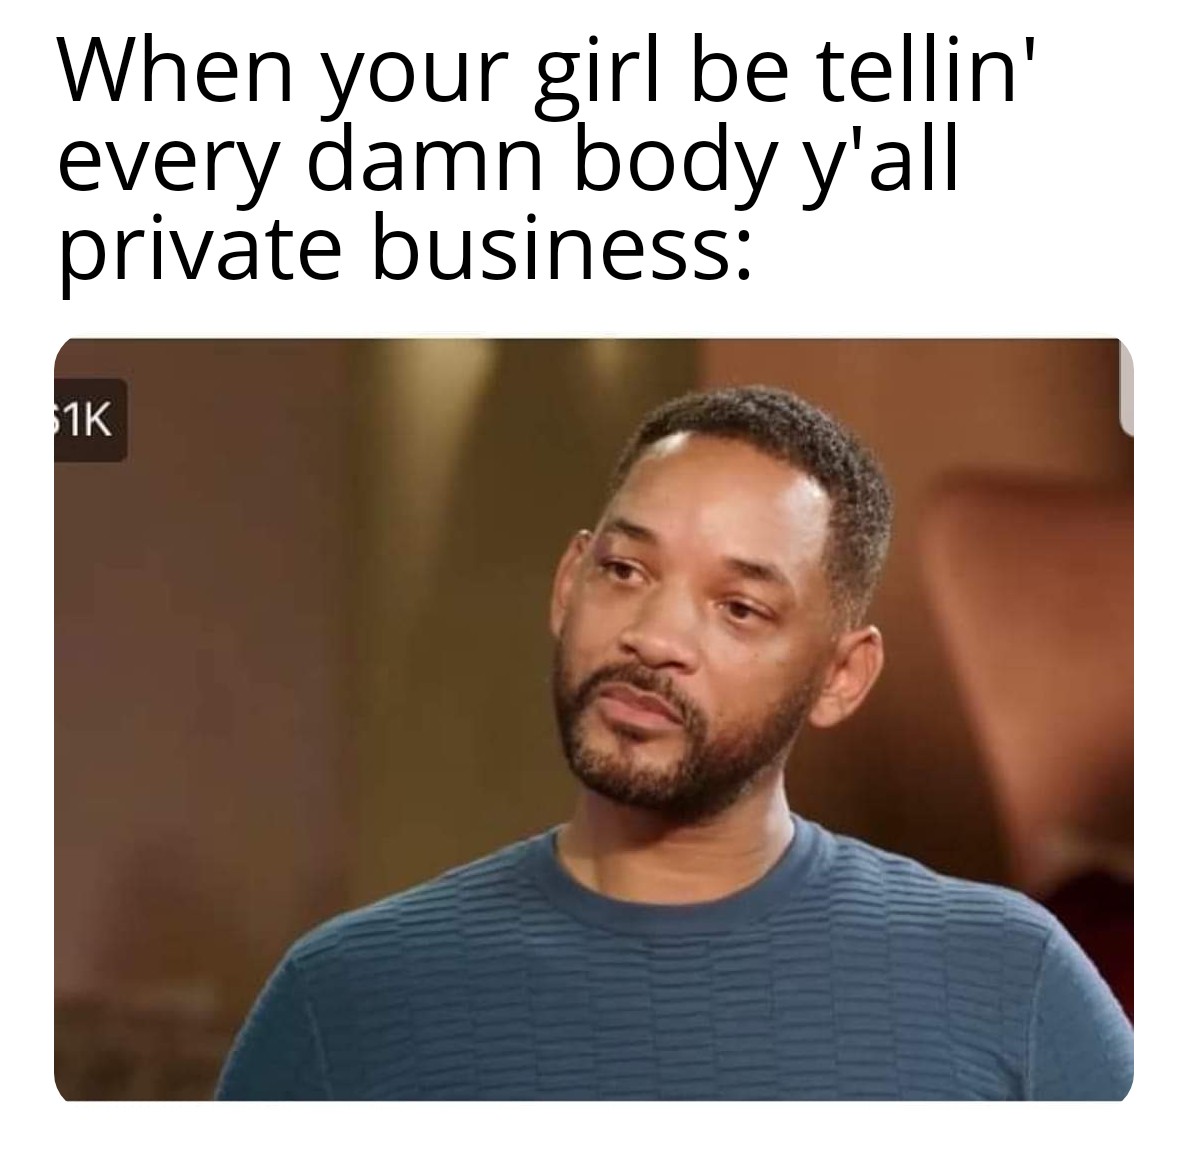 beard - When your girl be tellin' every damn body y'all private business 1K